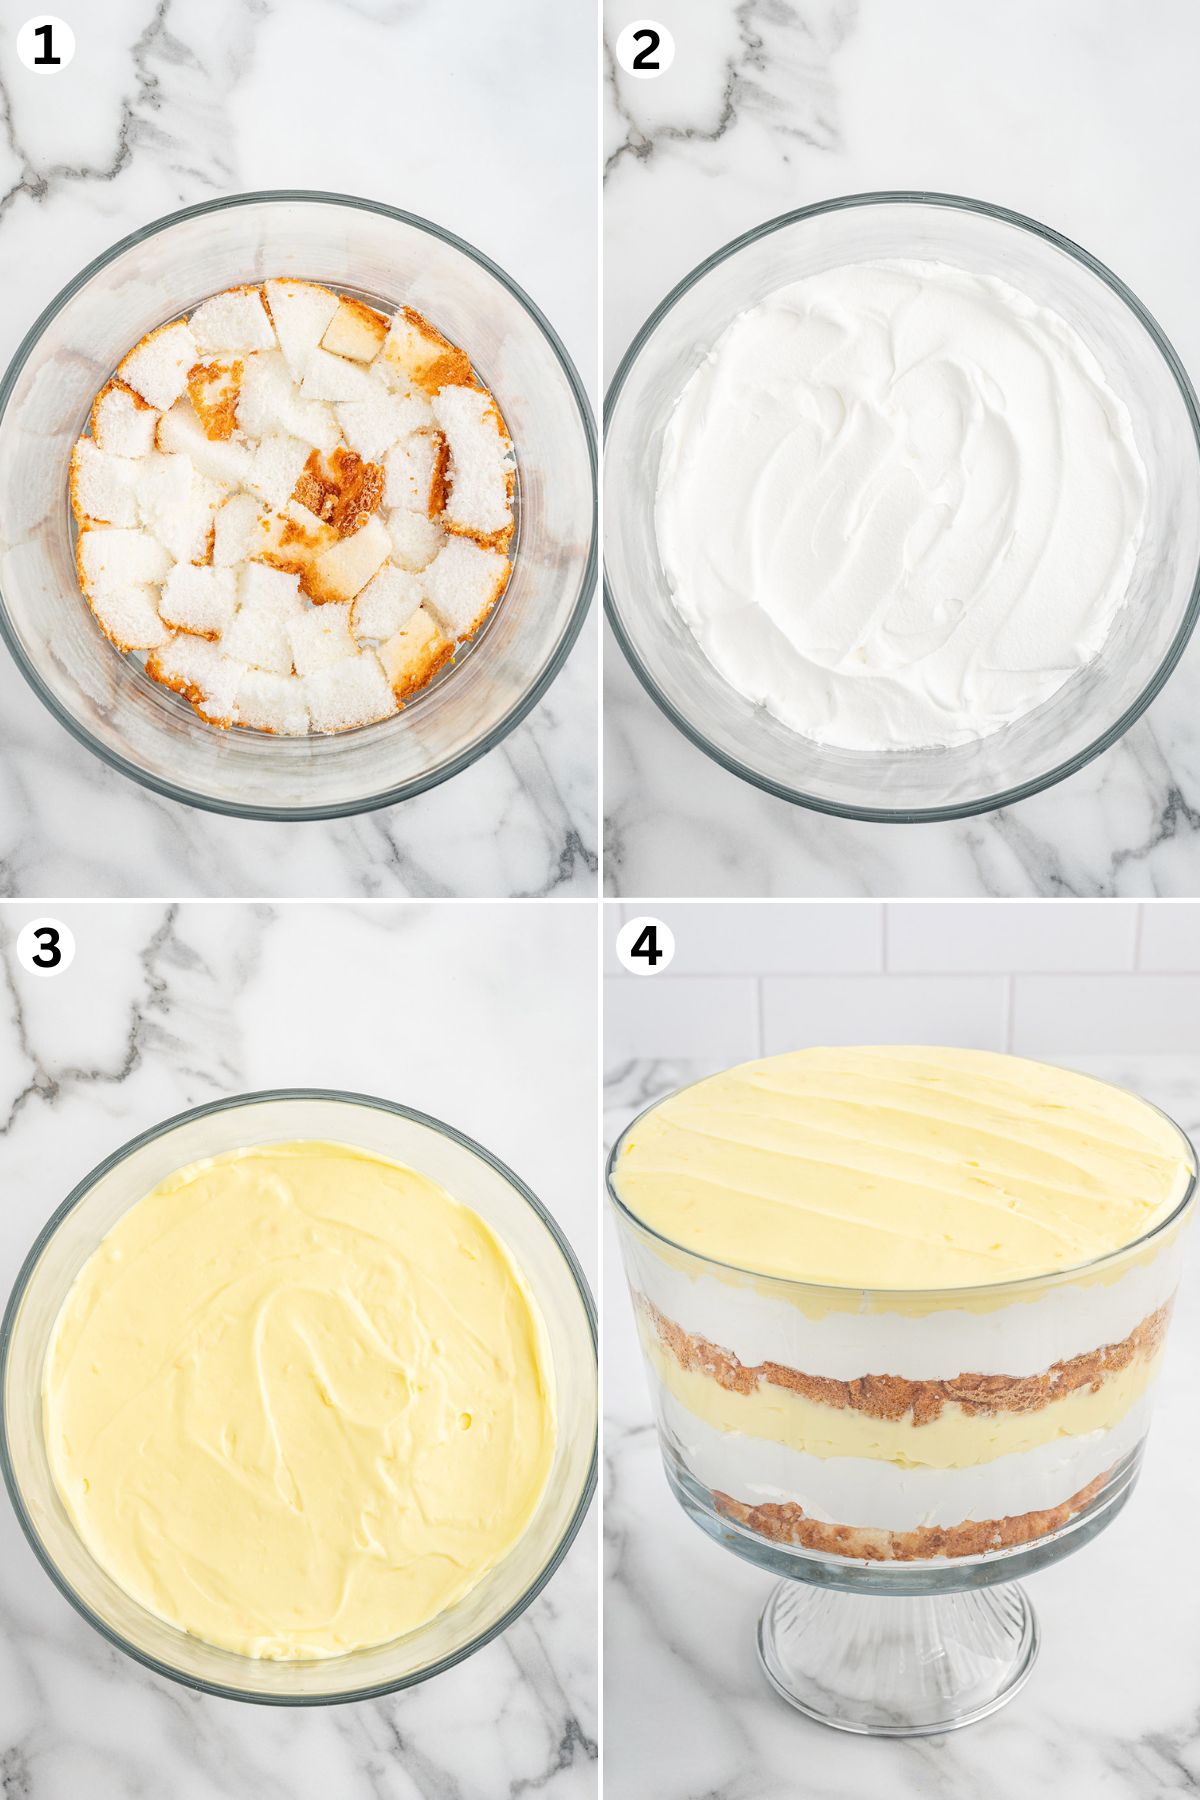 In a trifle bowl, assemble the cake cubes at the bottom. Add the whipped topping. Then spread the pudding mixture. Repeat steps and chill. 